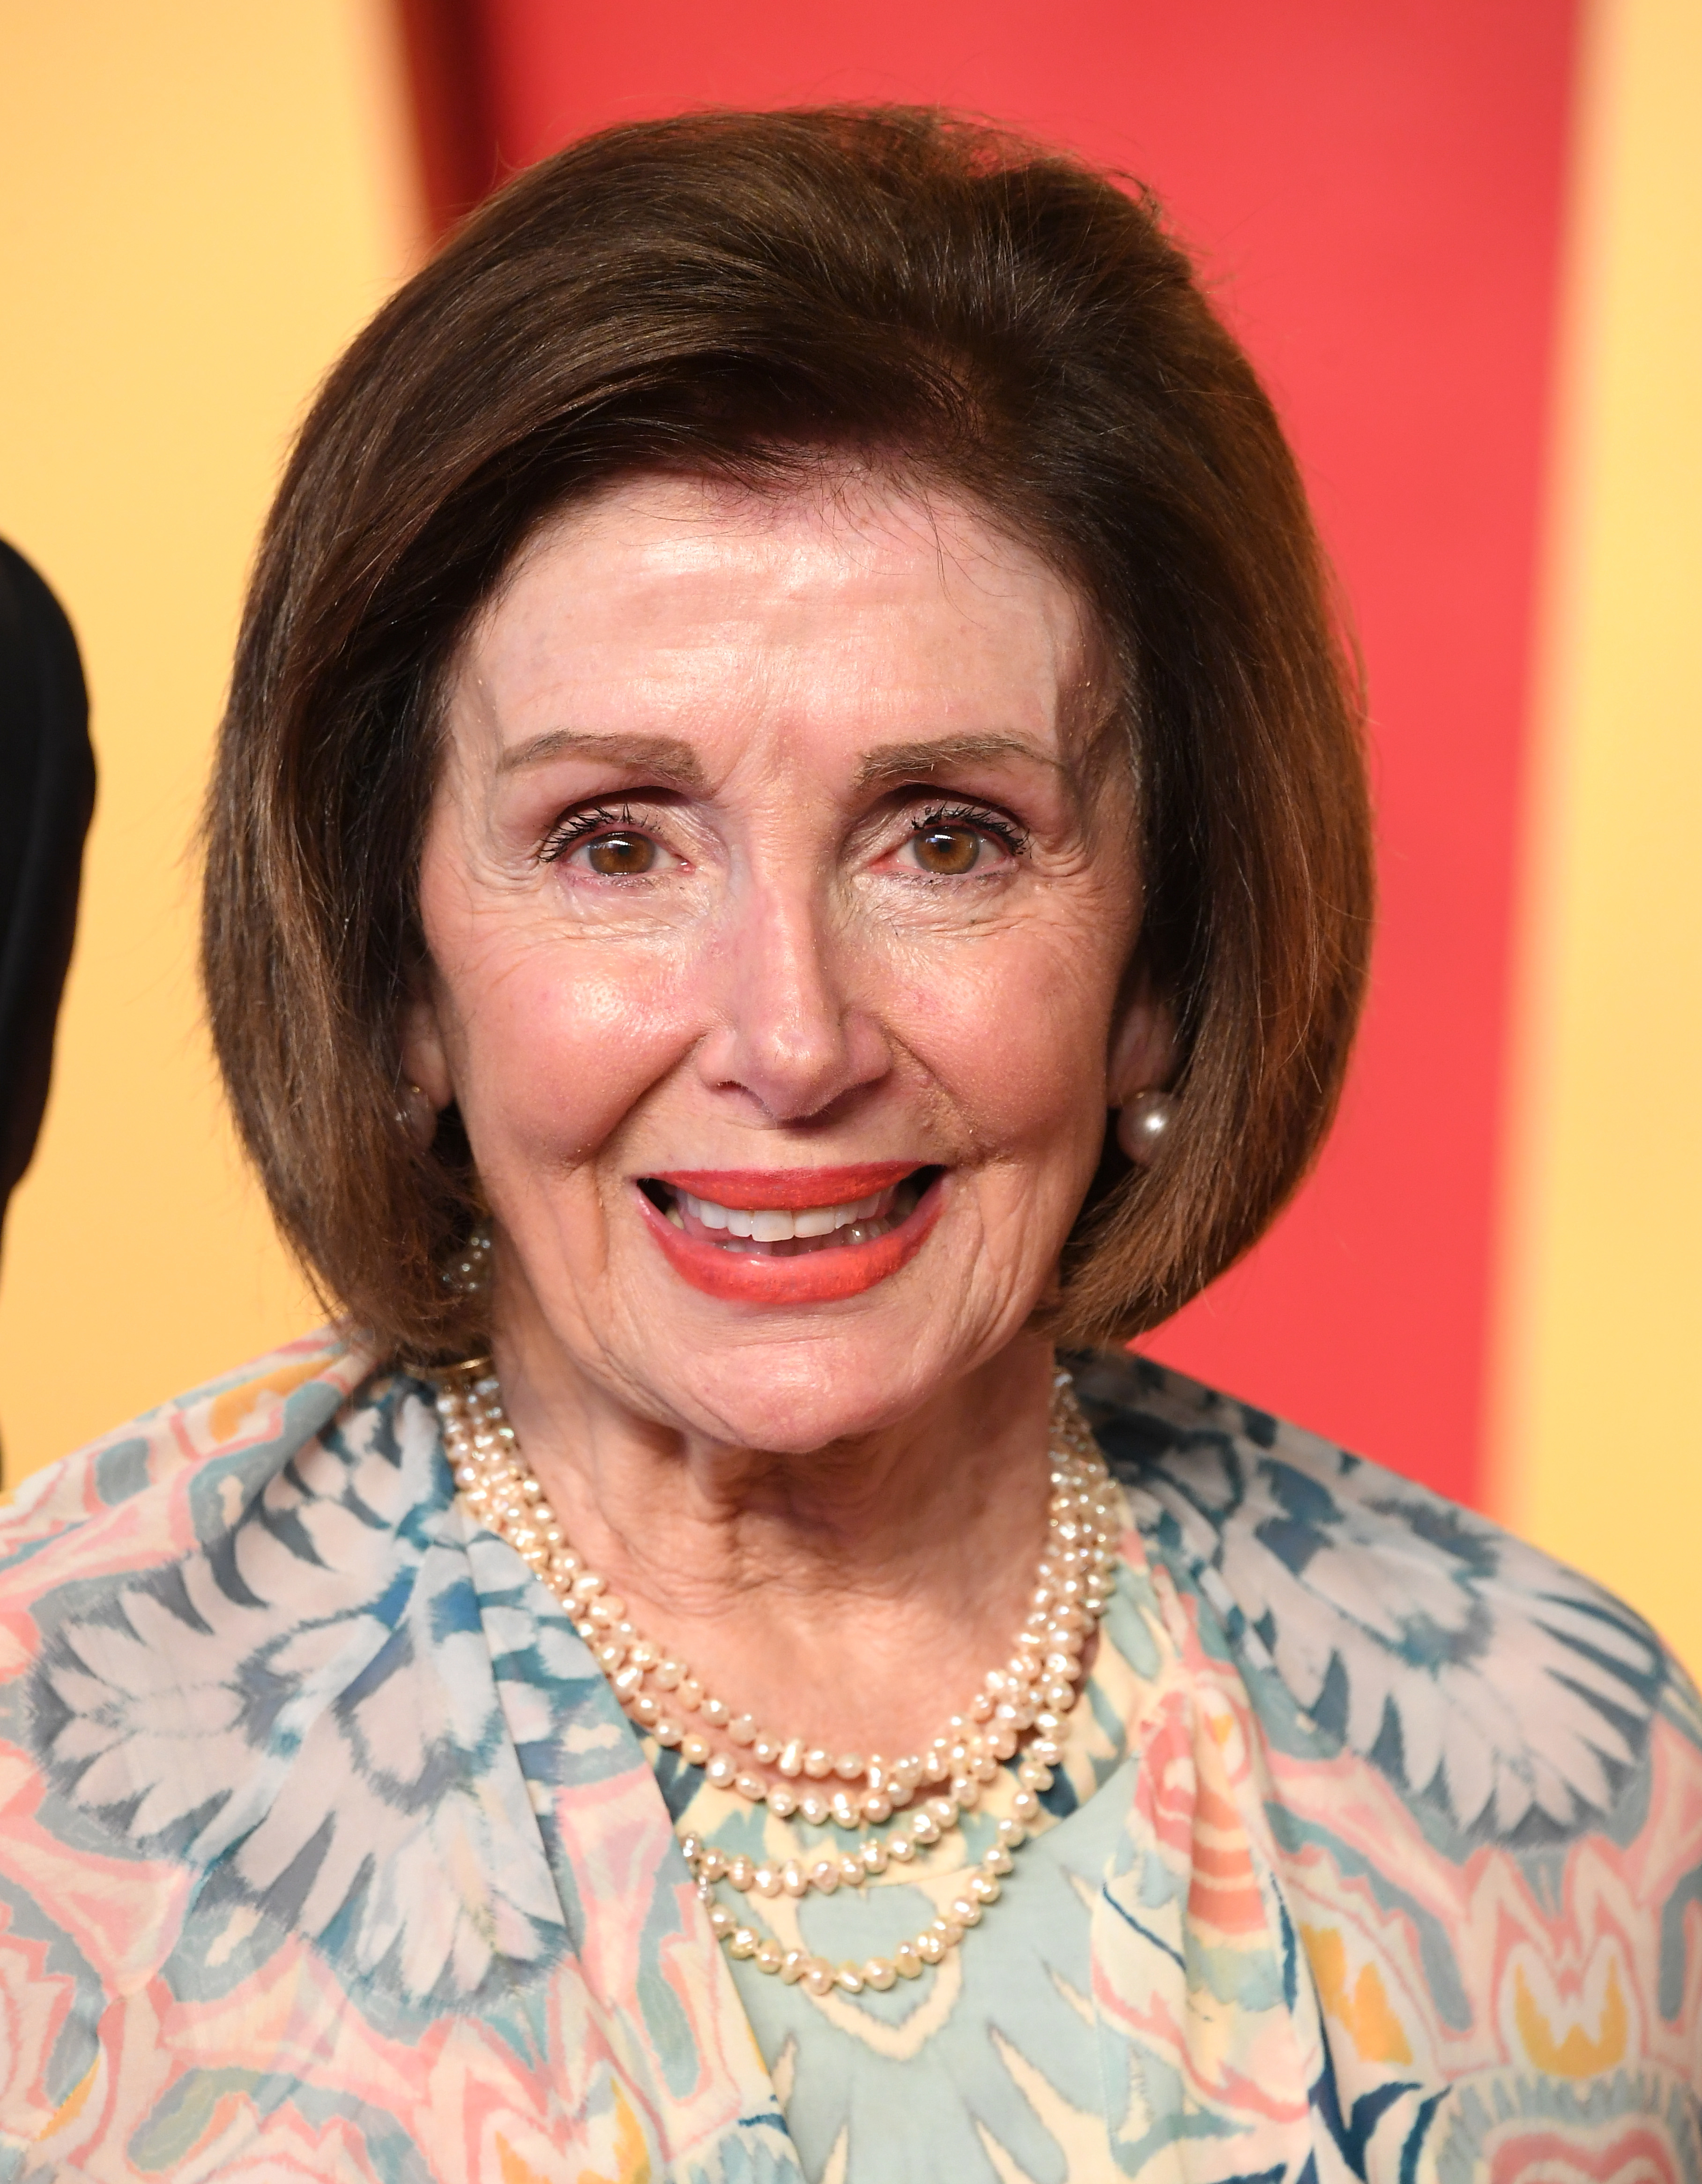 Nancy Pelosi smiling and wearing a patterned dress and pearl necklace